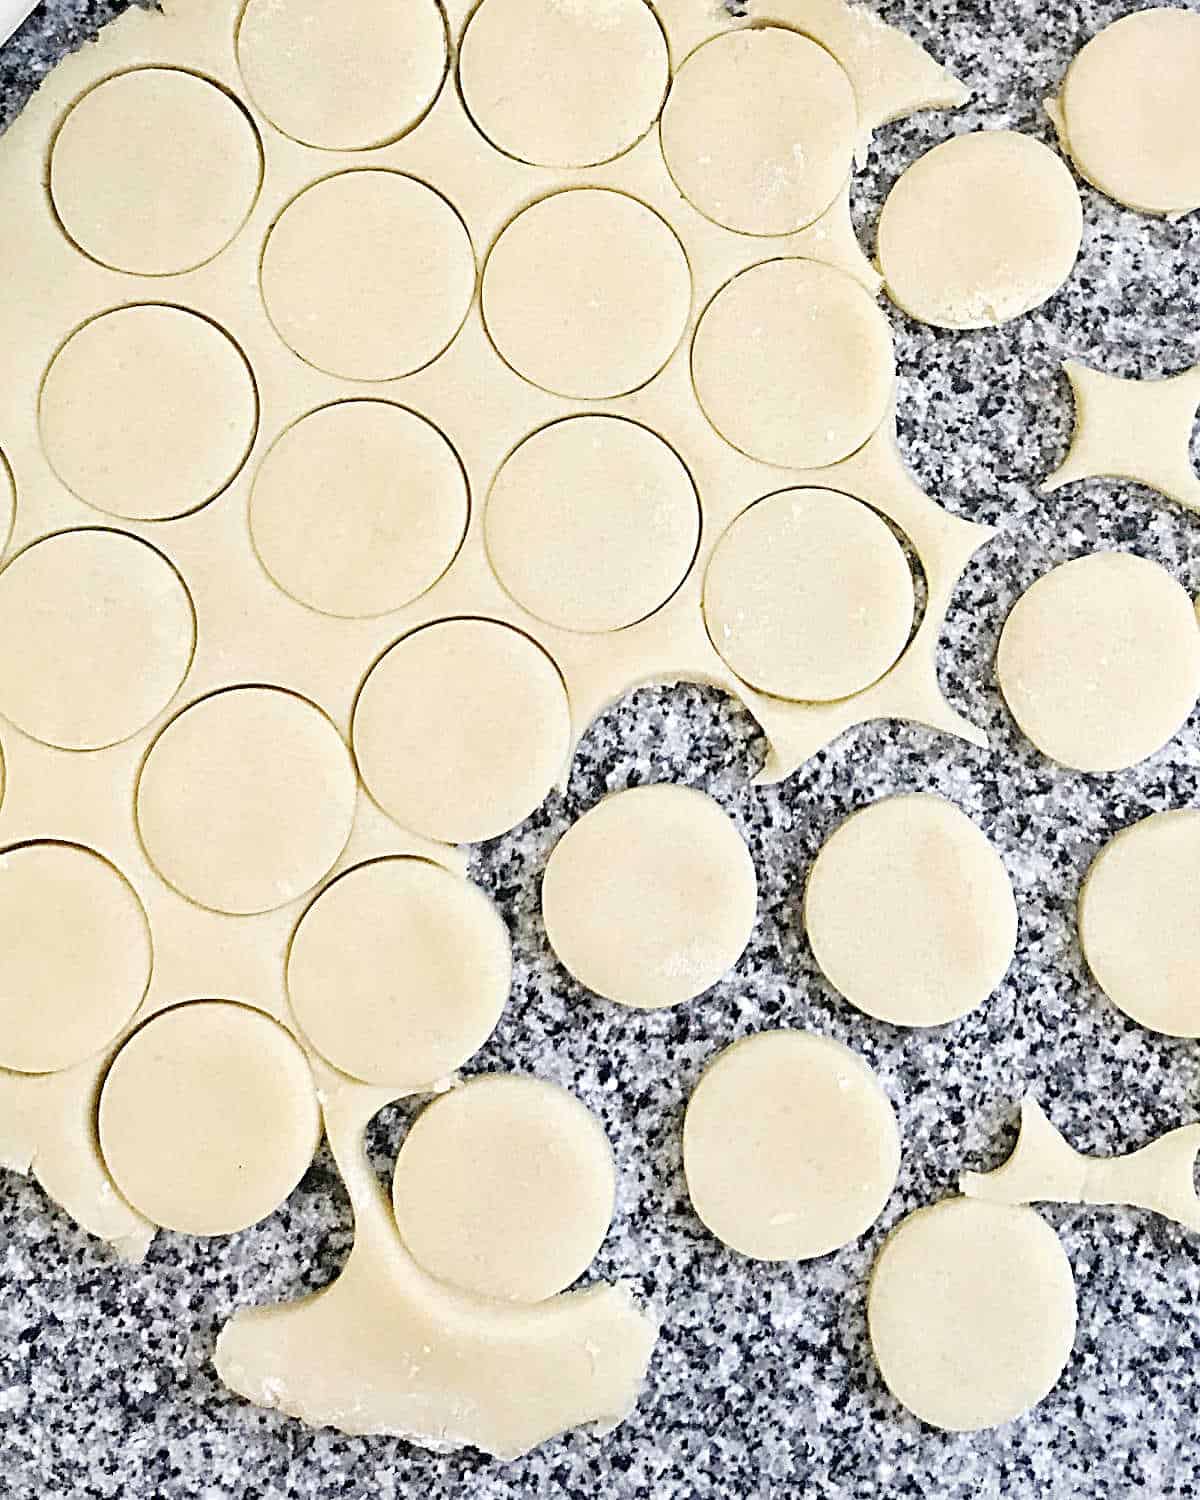 Grey granite surface with rolled shortbread dough and cut round cookies.